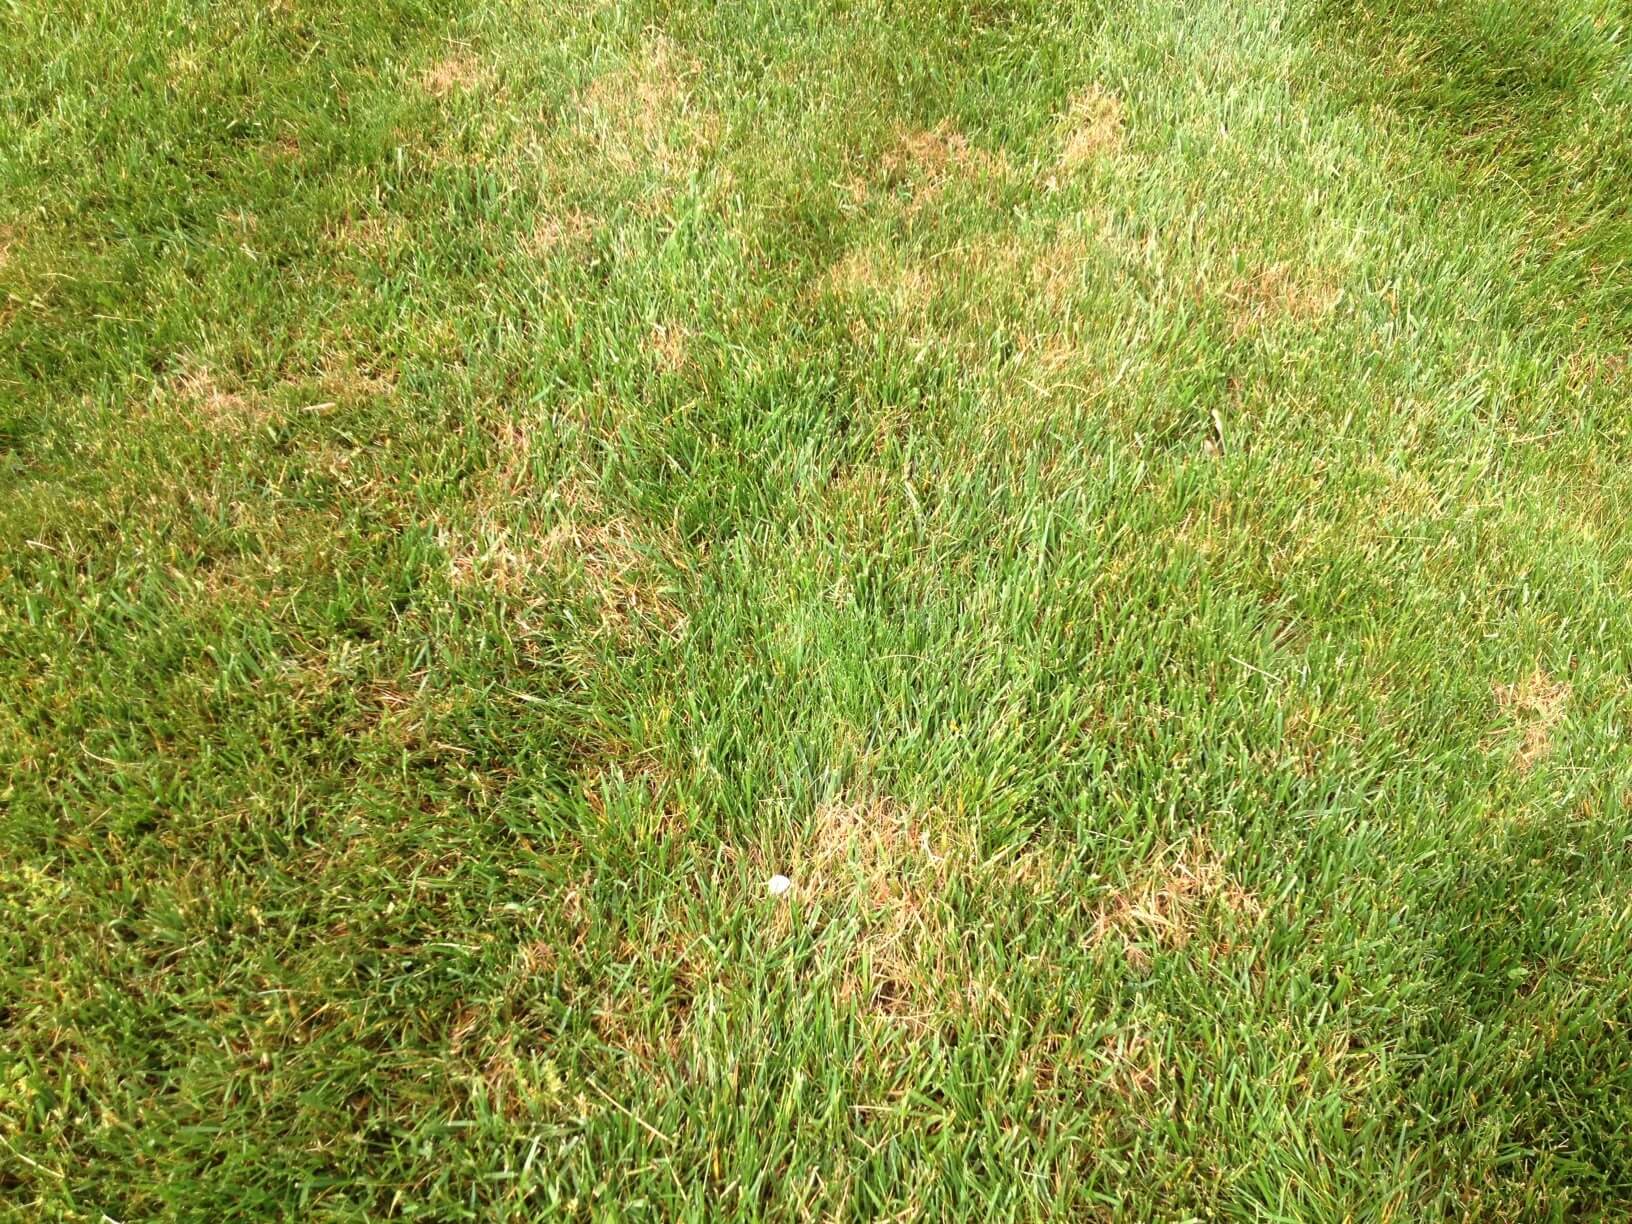 Lawn Diseases and Fungus | ProLawnPlus